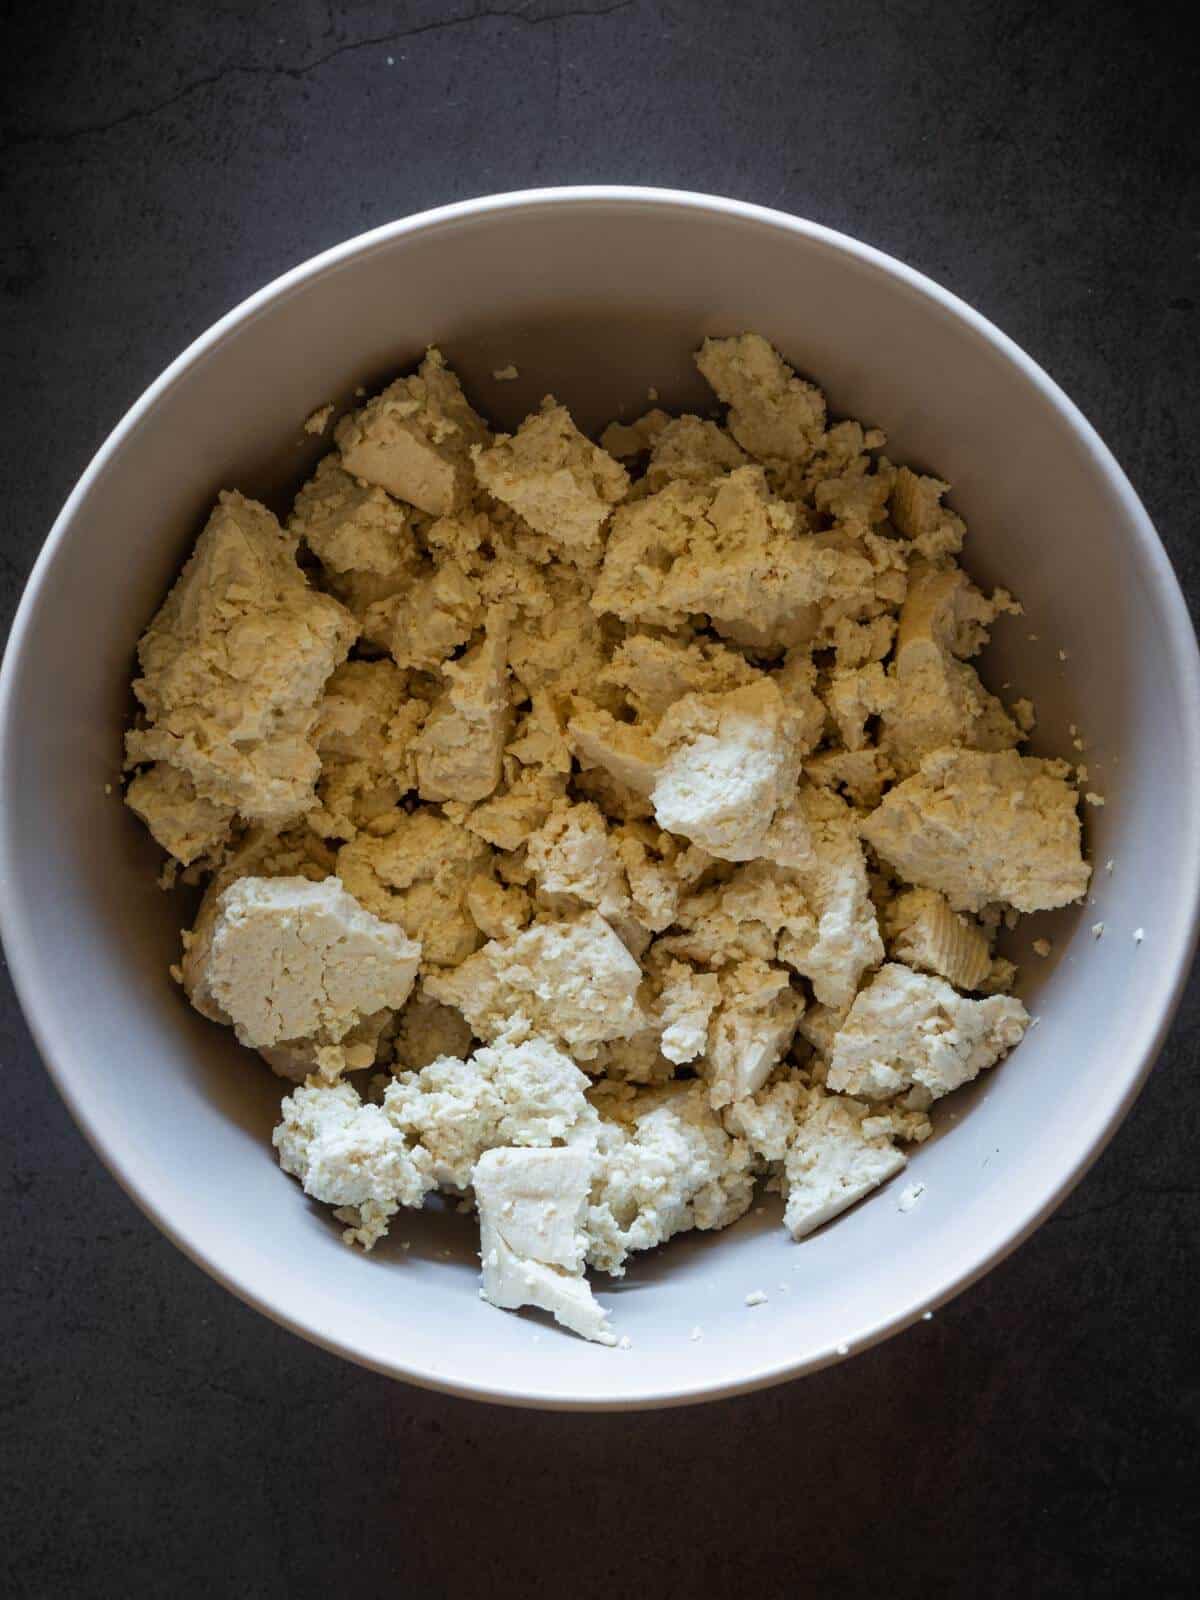 coarsely crumbled extra-firm tofu.